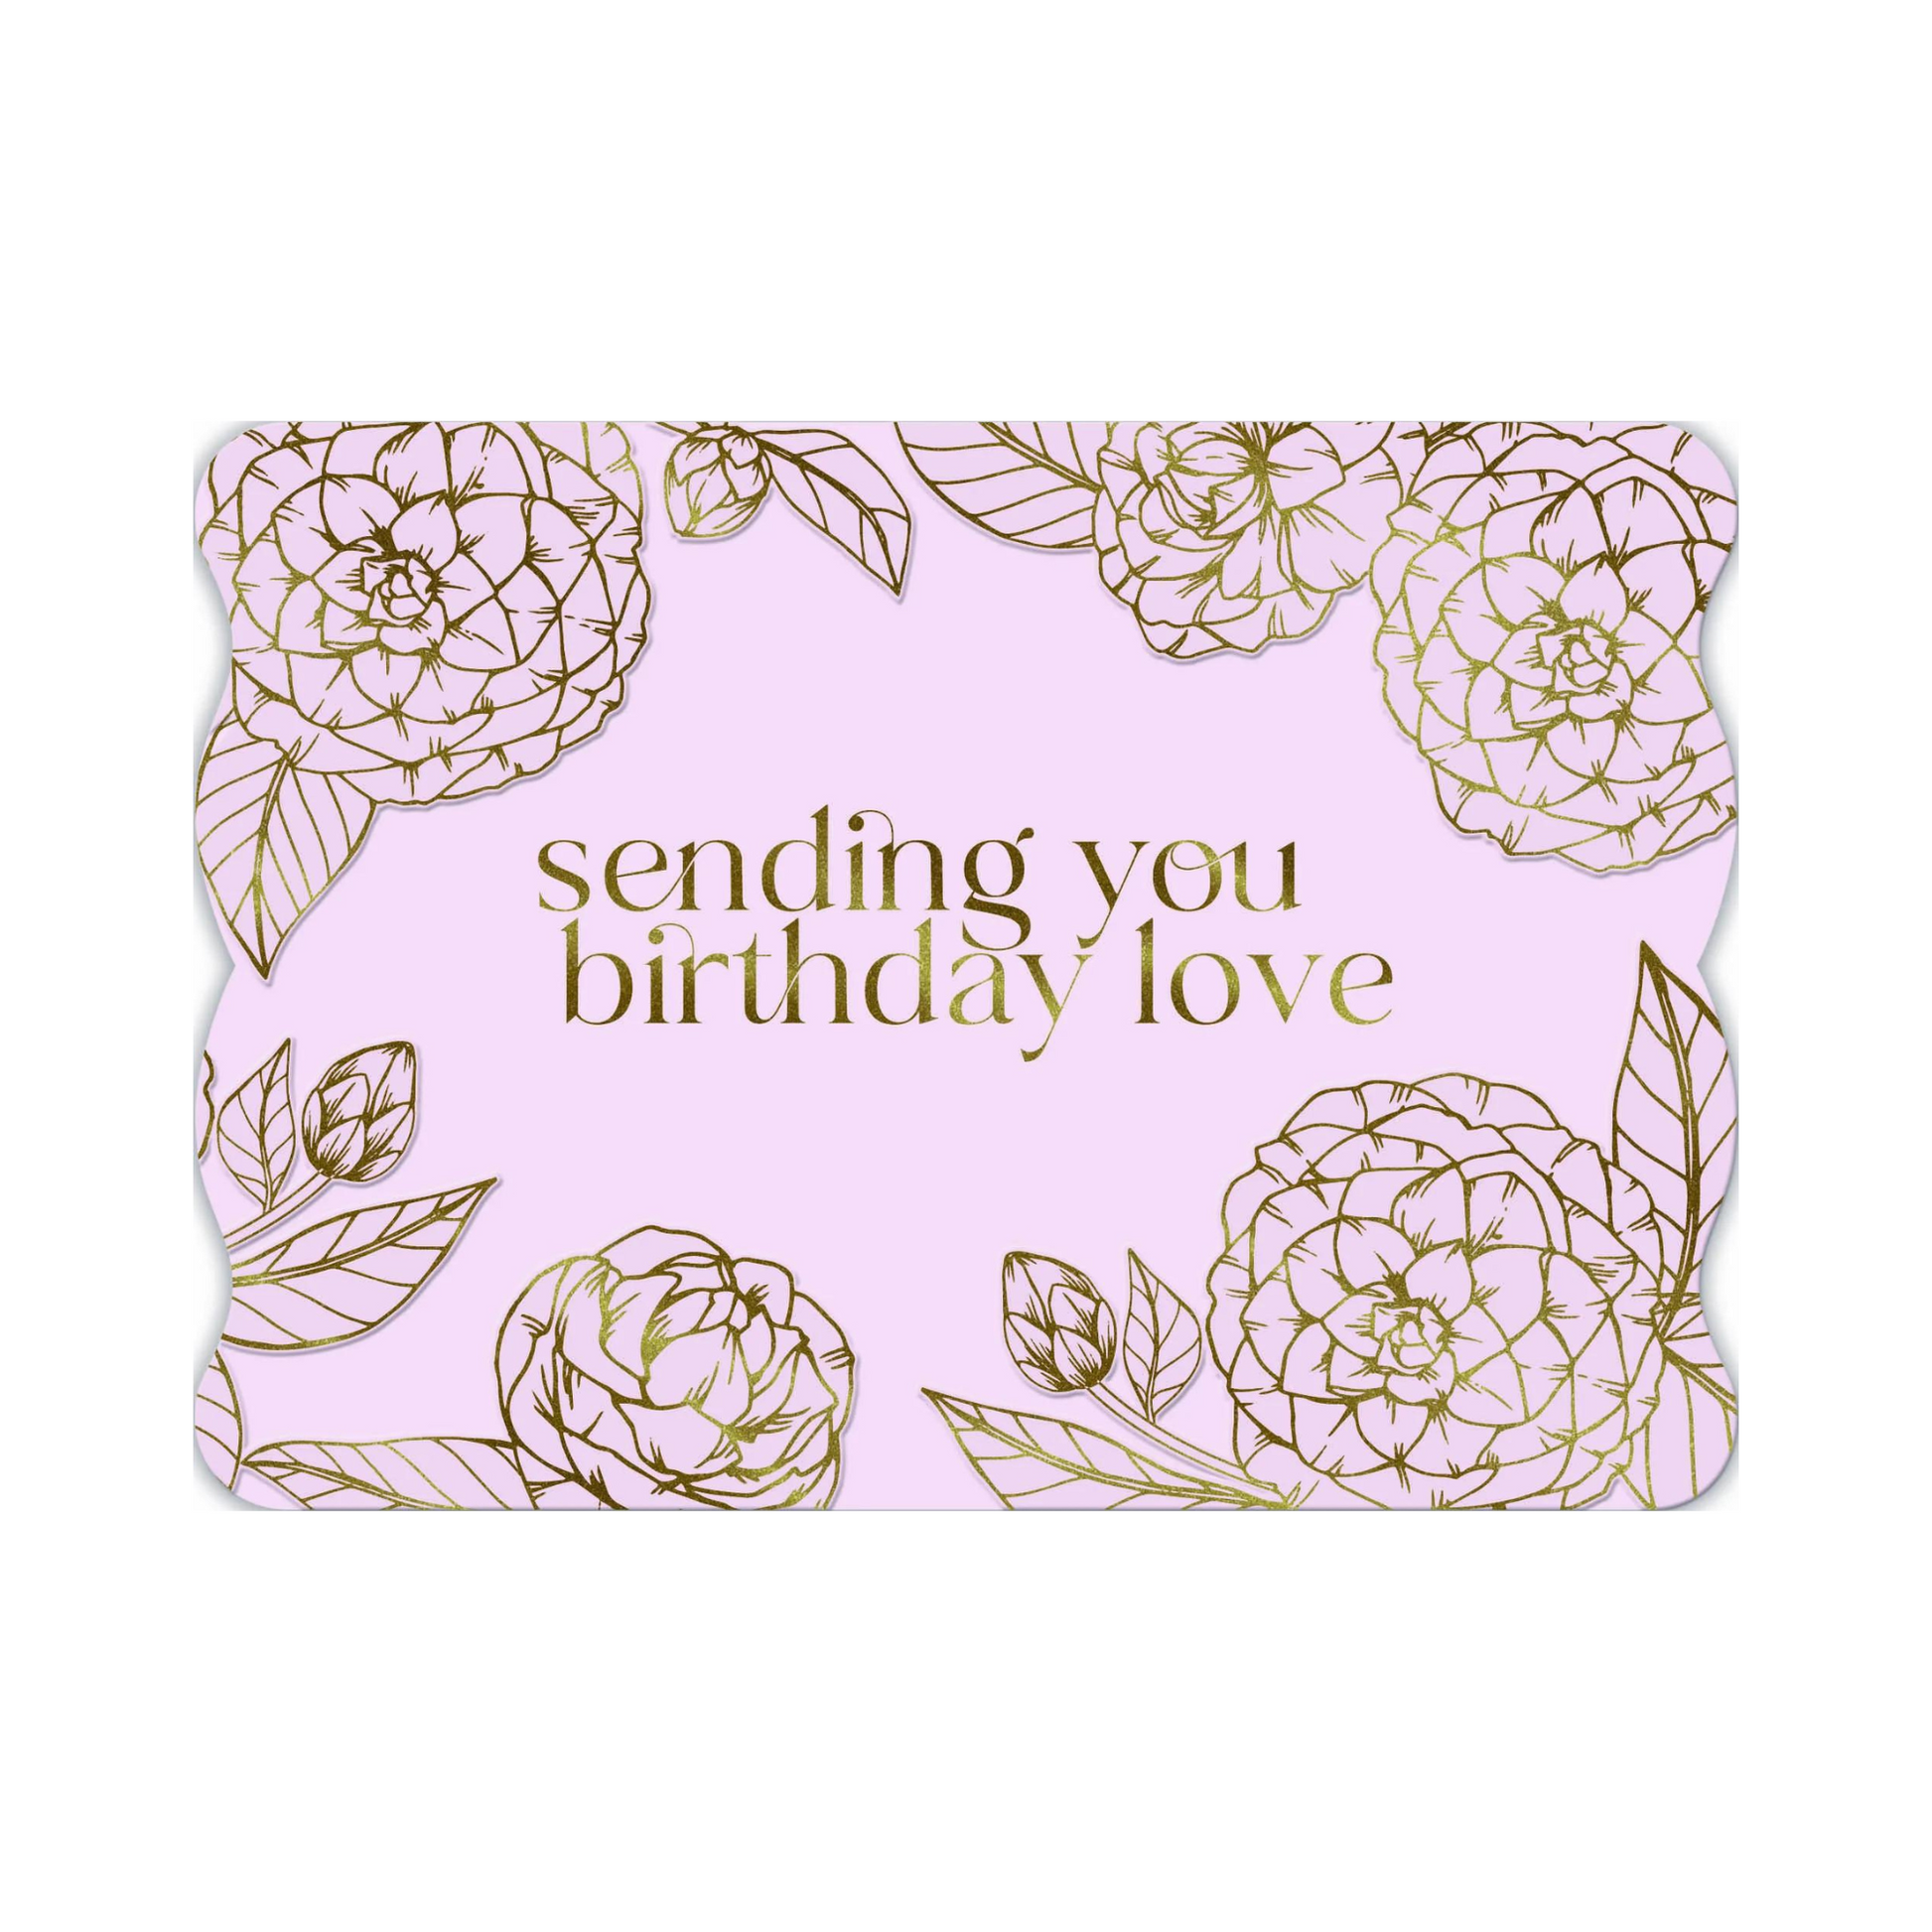 greeting card with floral illustration